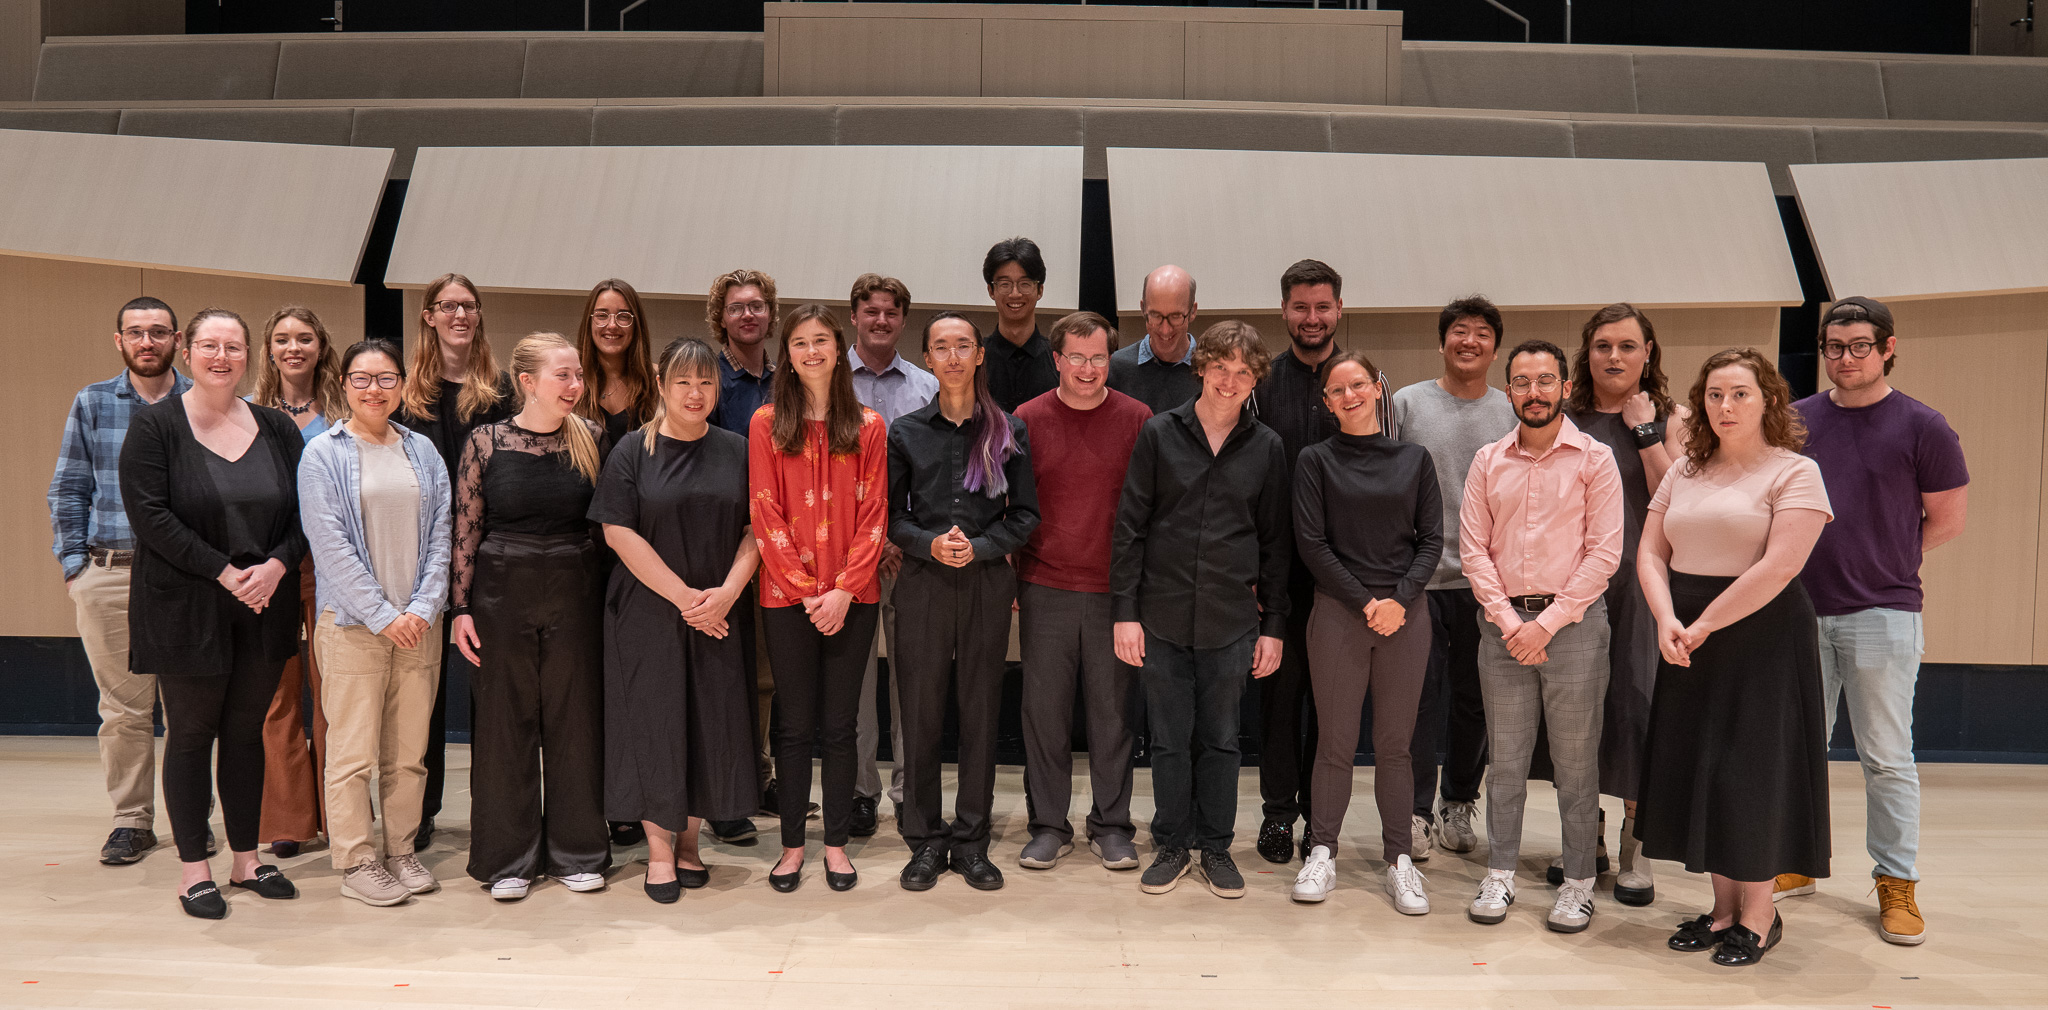 group photo of composers and musicians